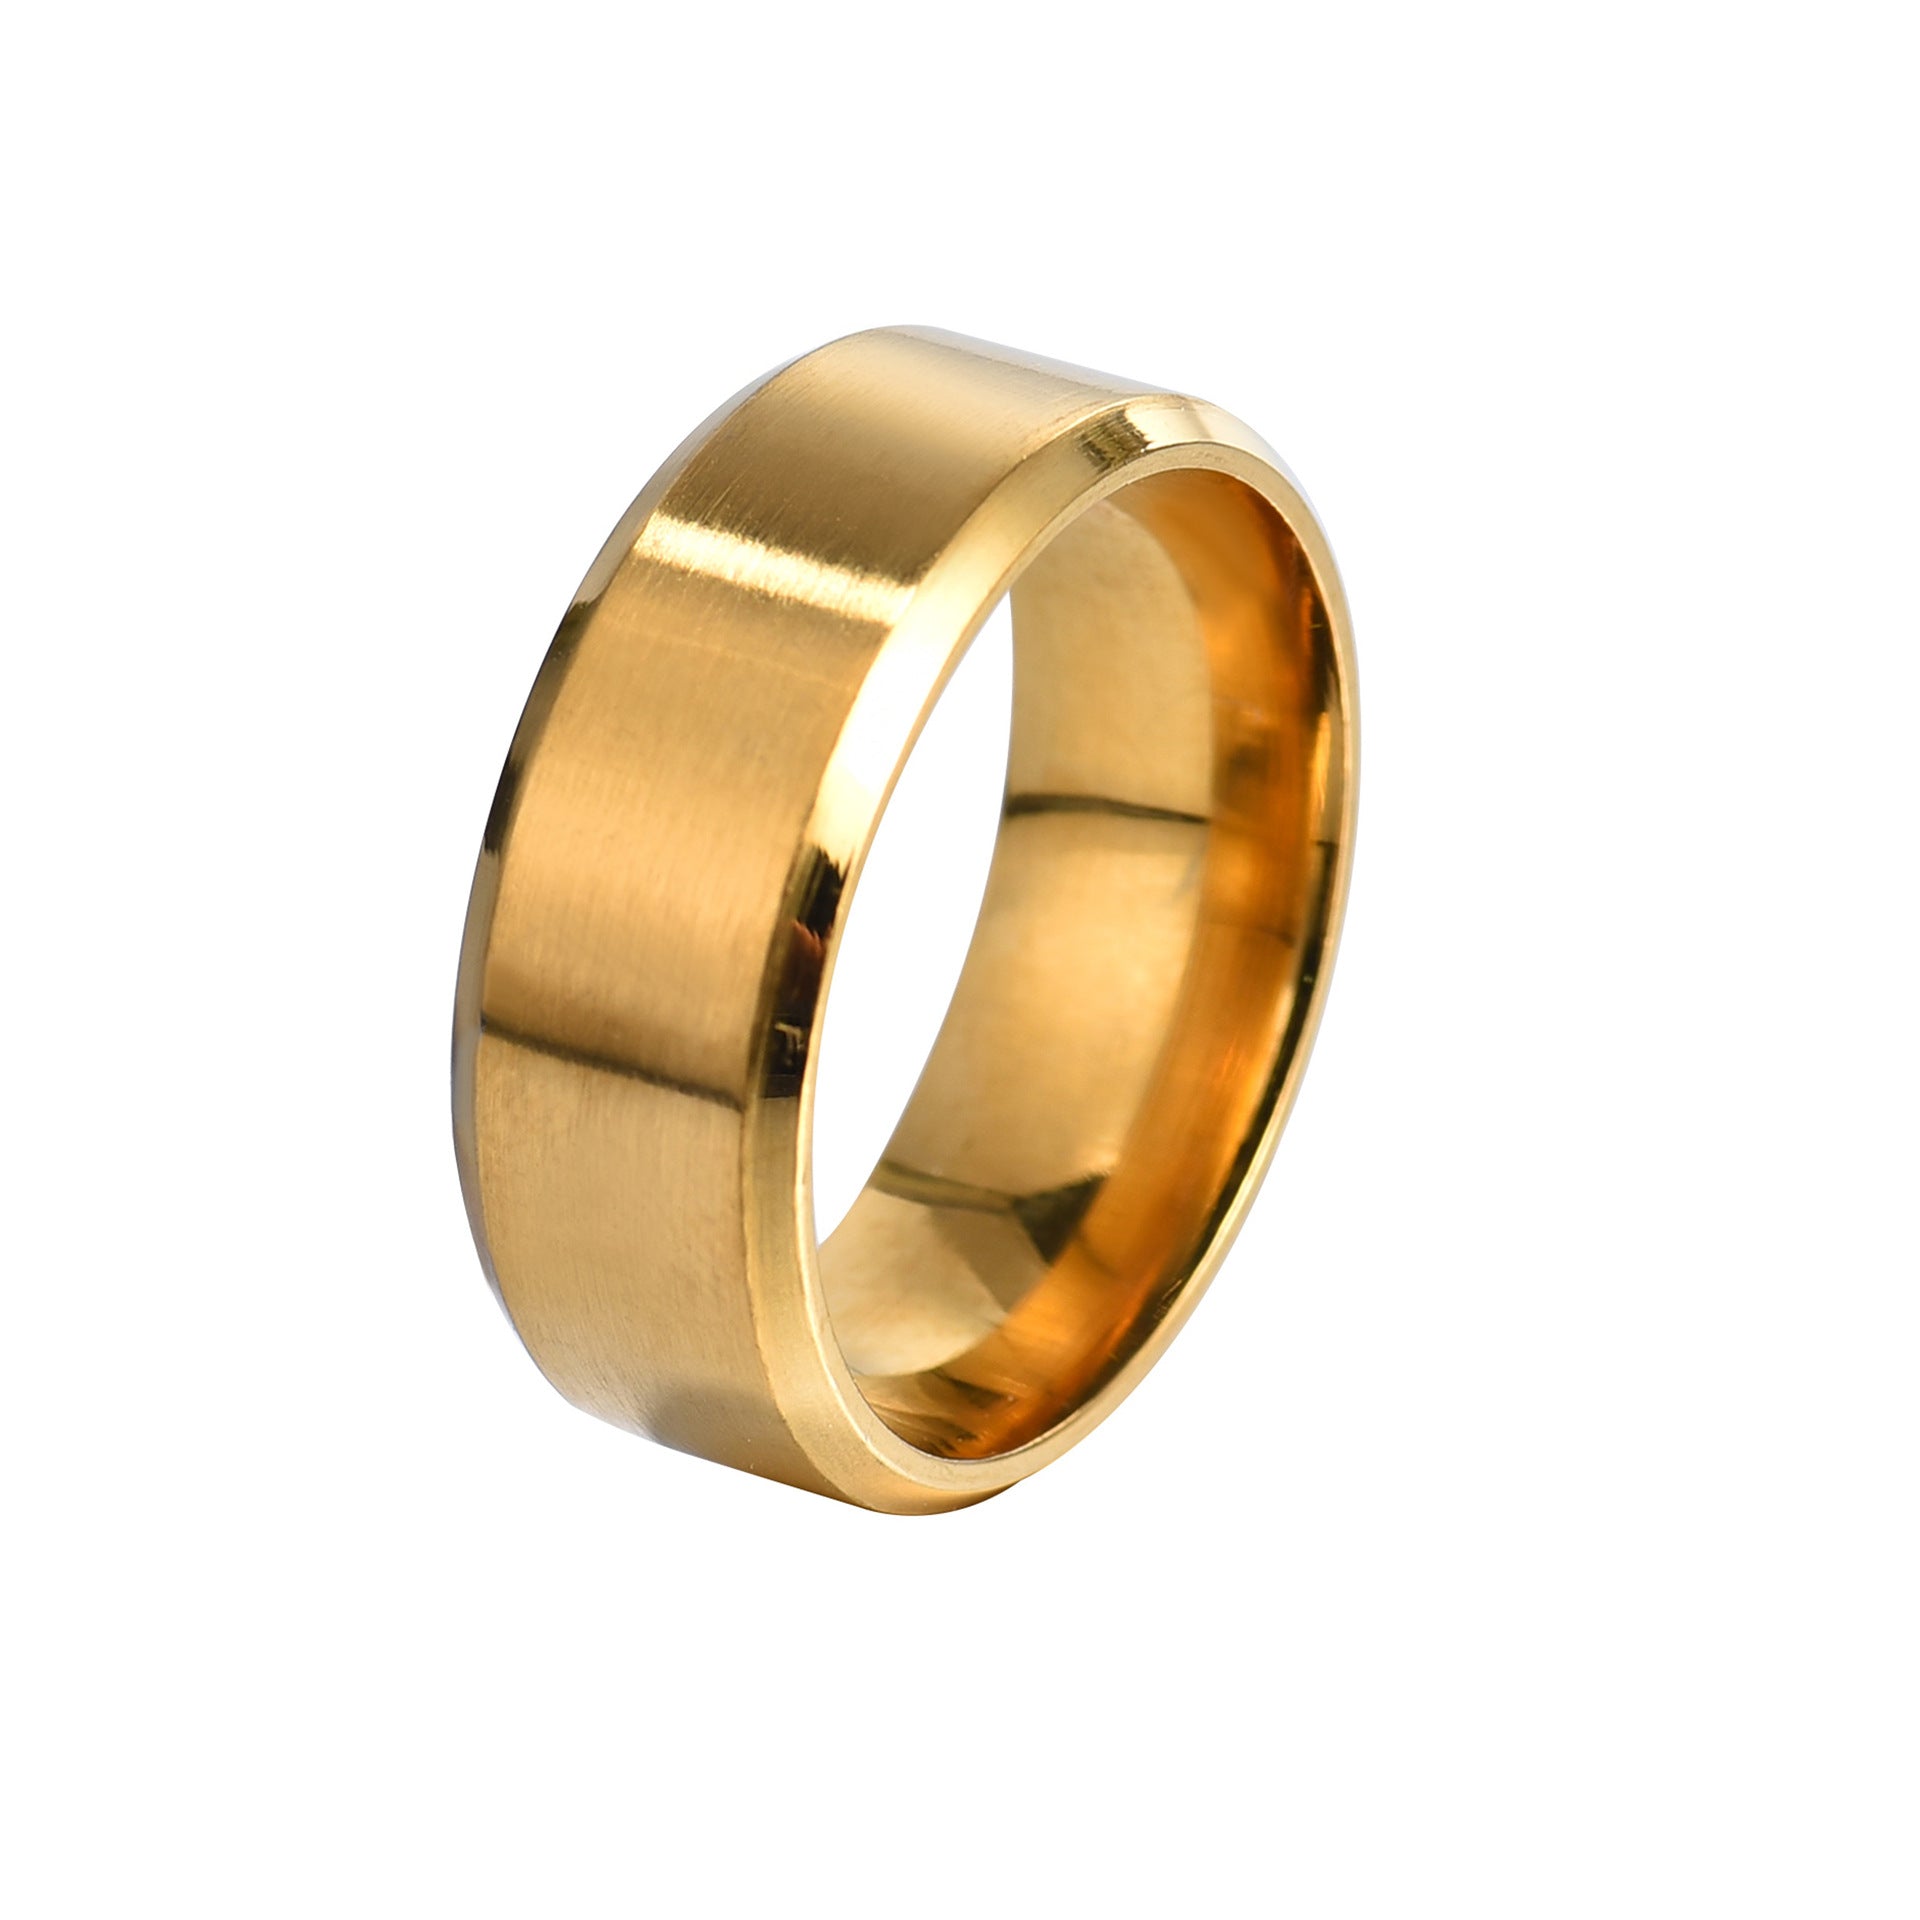 Gold Colored 316L Quality Steel Ring Wedding Ring (21 Size)